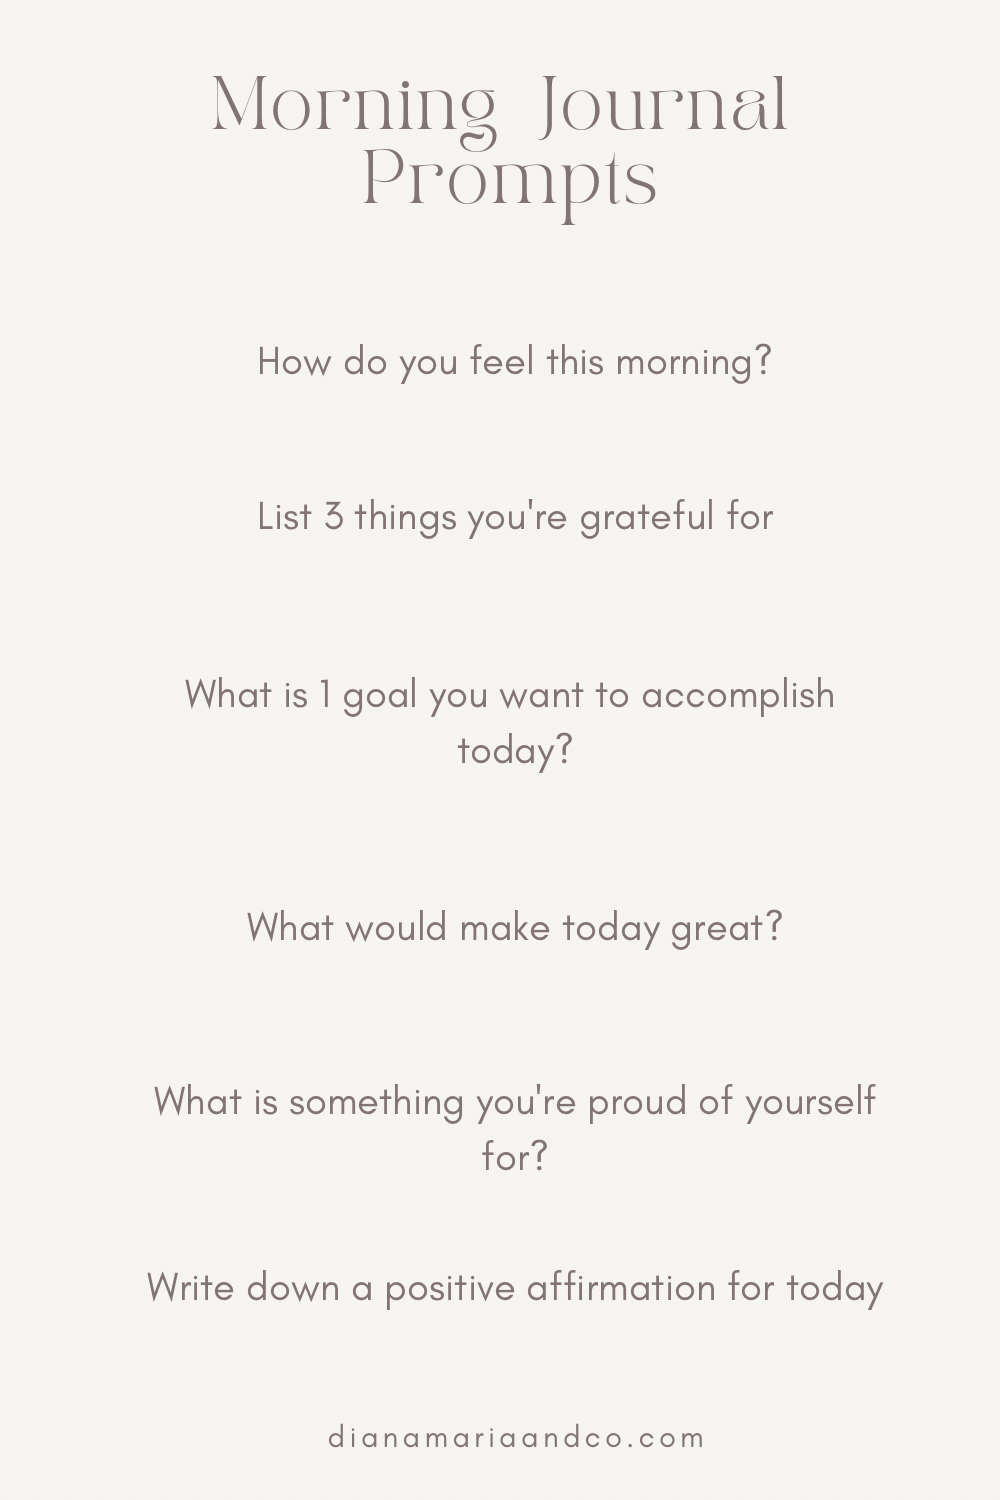 Simple Morning Journal Prompts To Start Your Day With - Diana Maria & Co